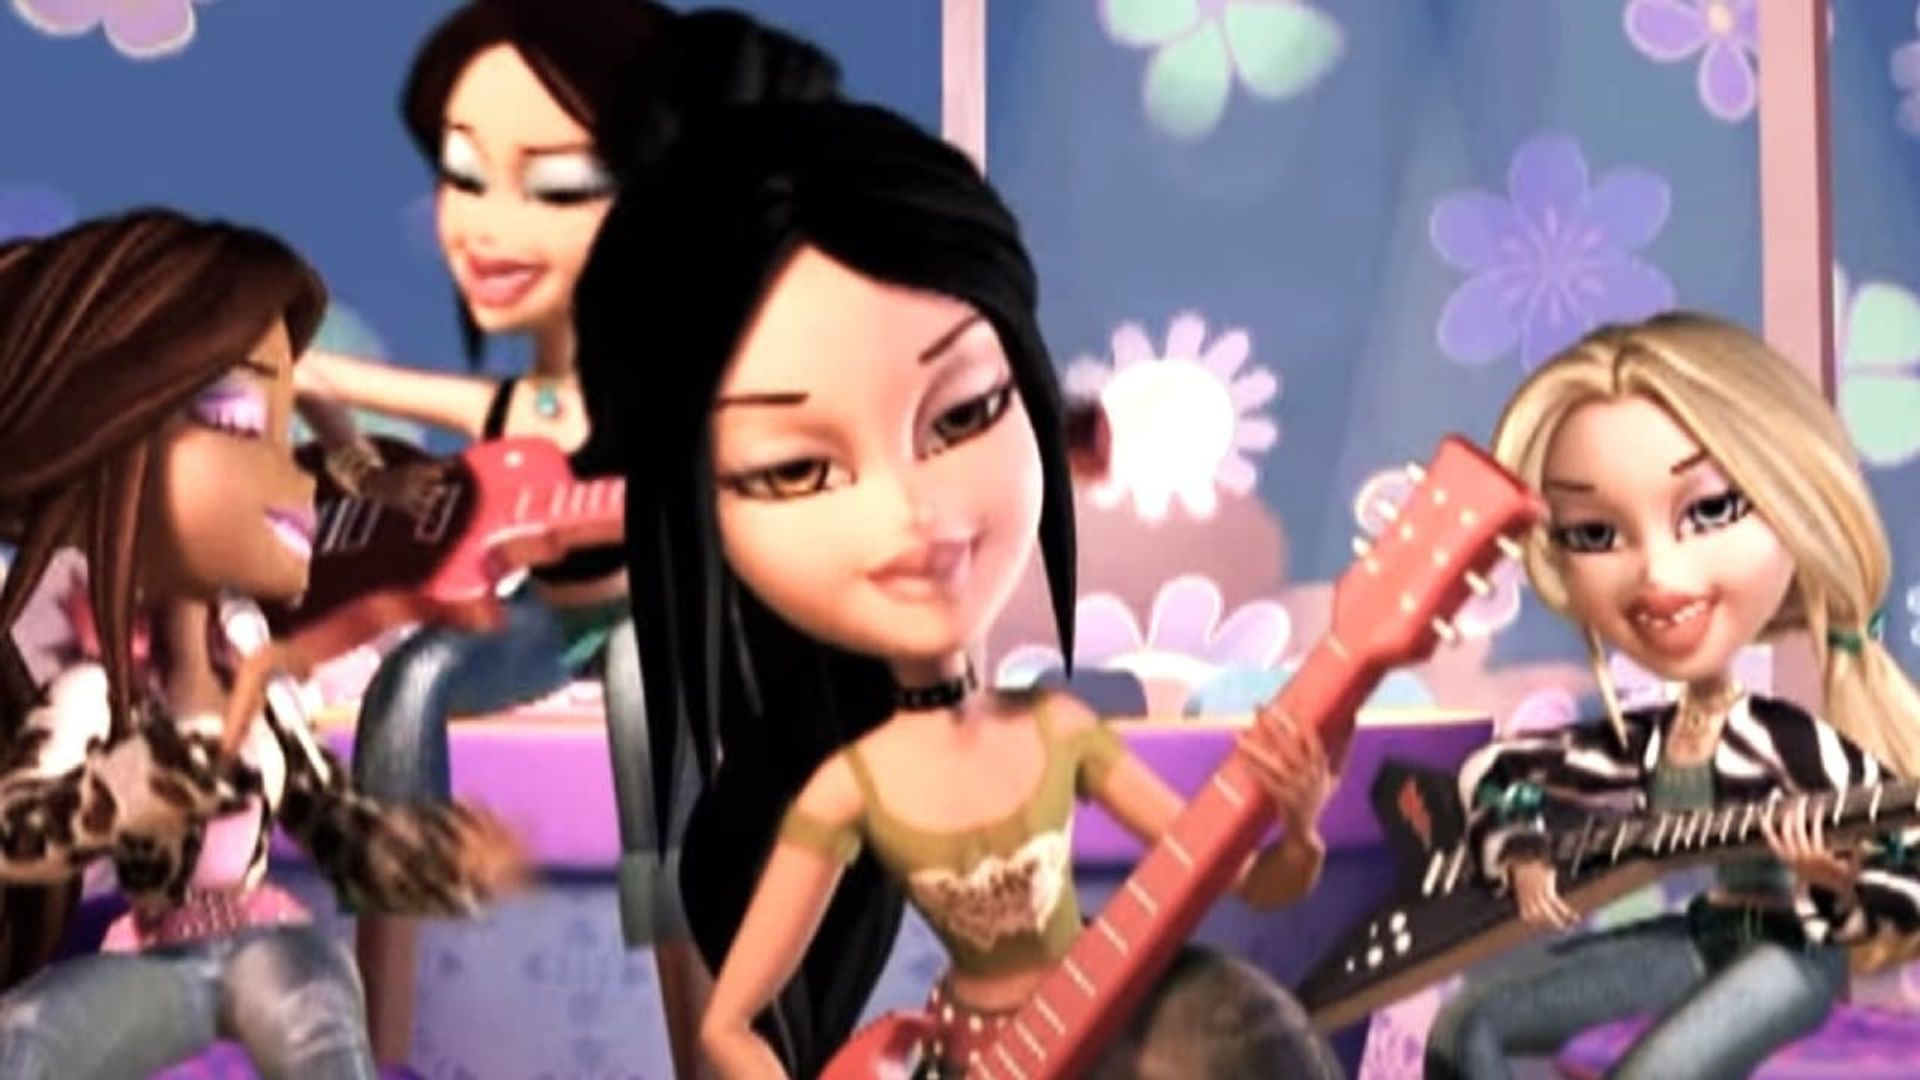 Livin' It Up with the Bratz background